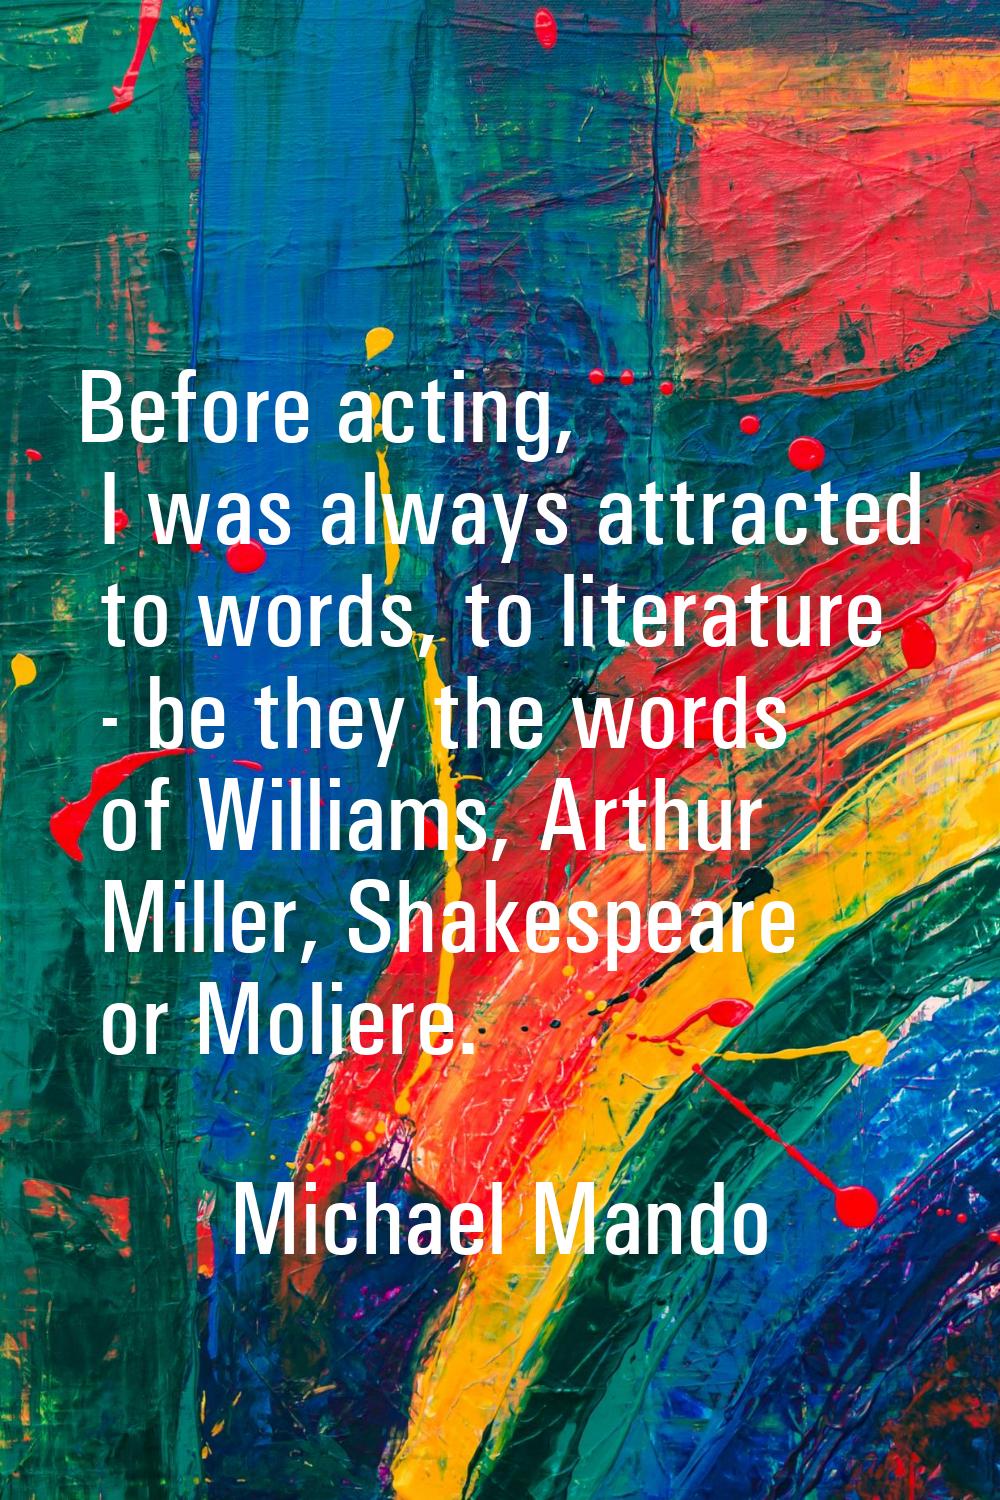 Before acting, I was always attracted to words, to literature - be they the words of Williams, Arth